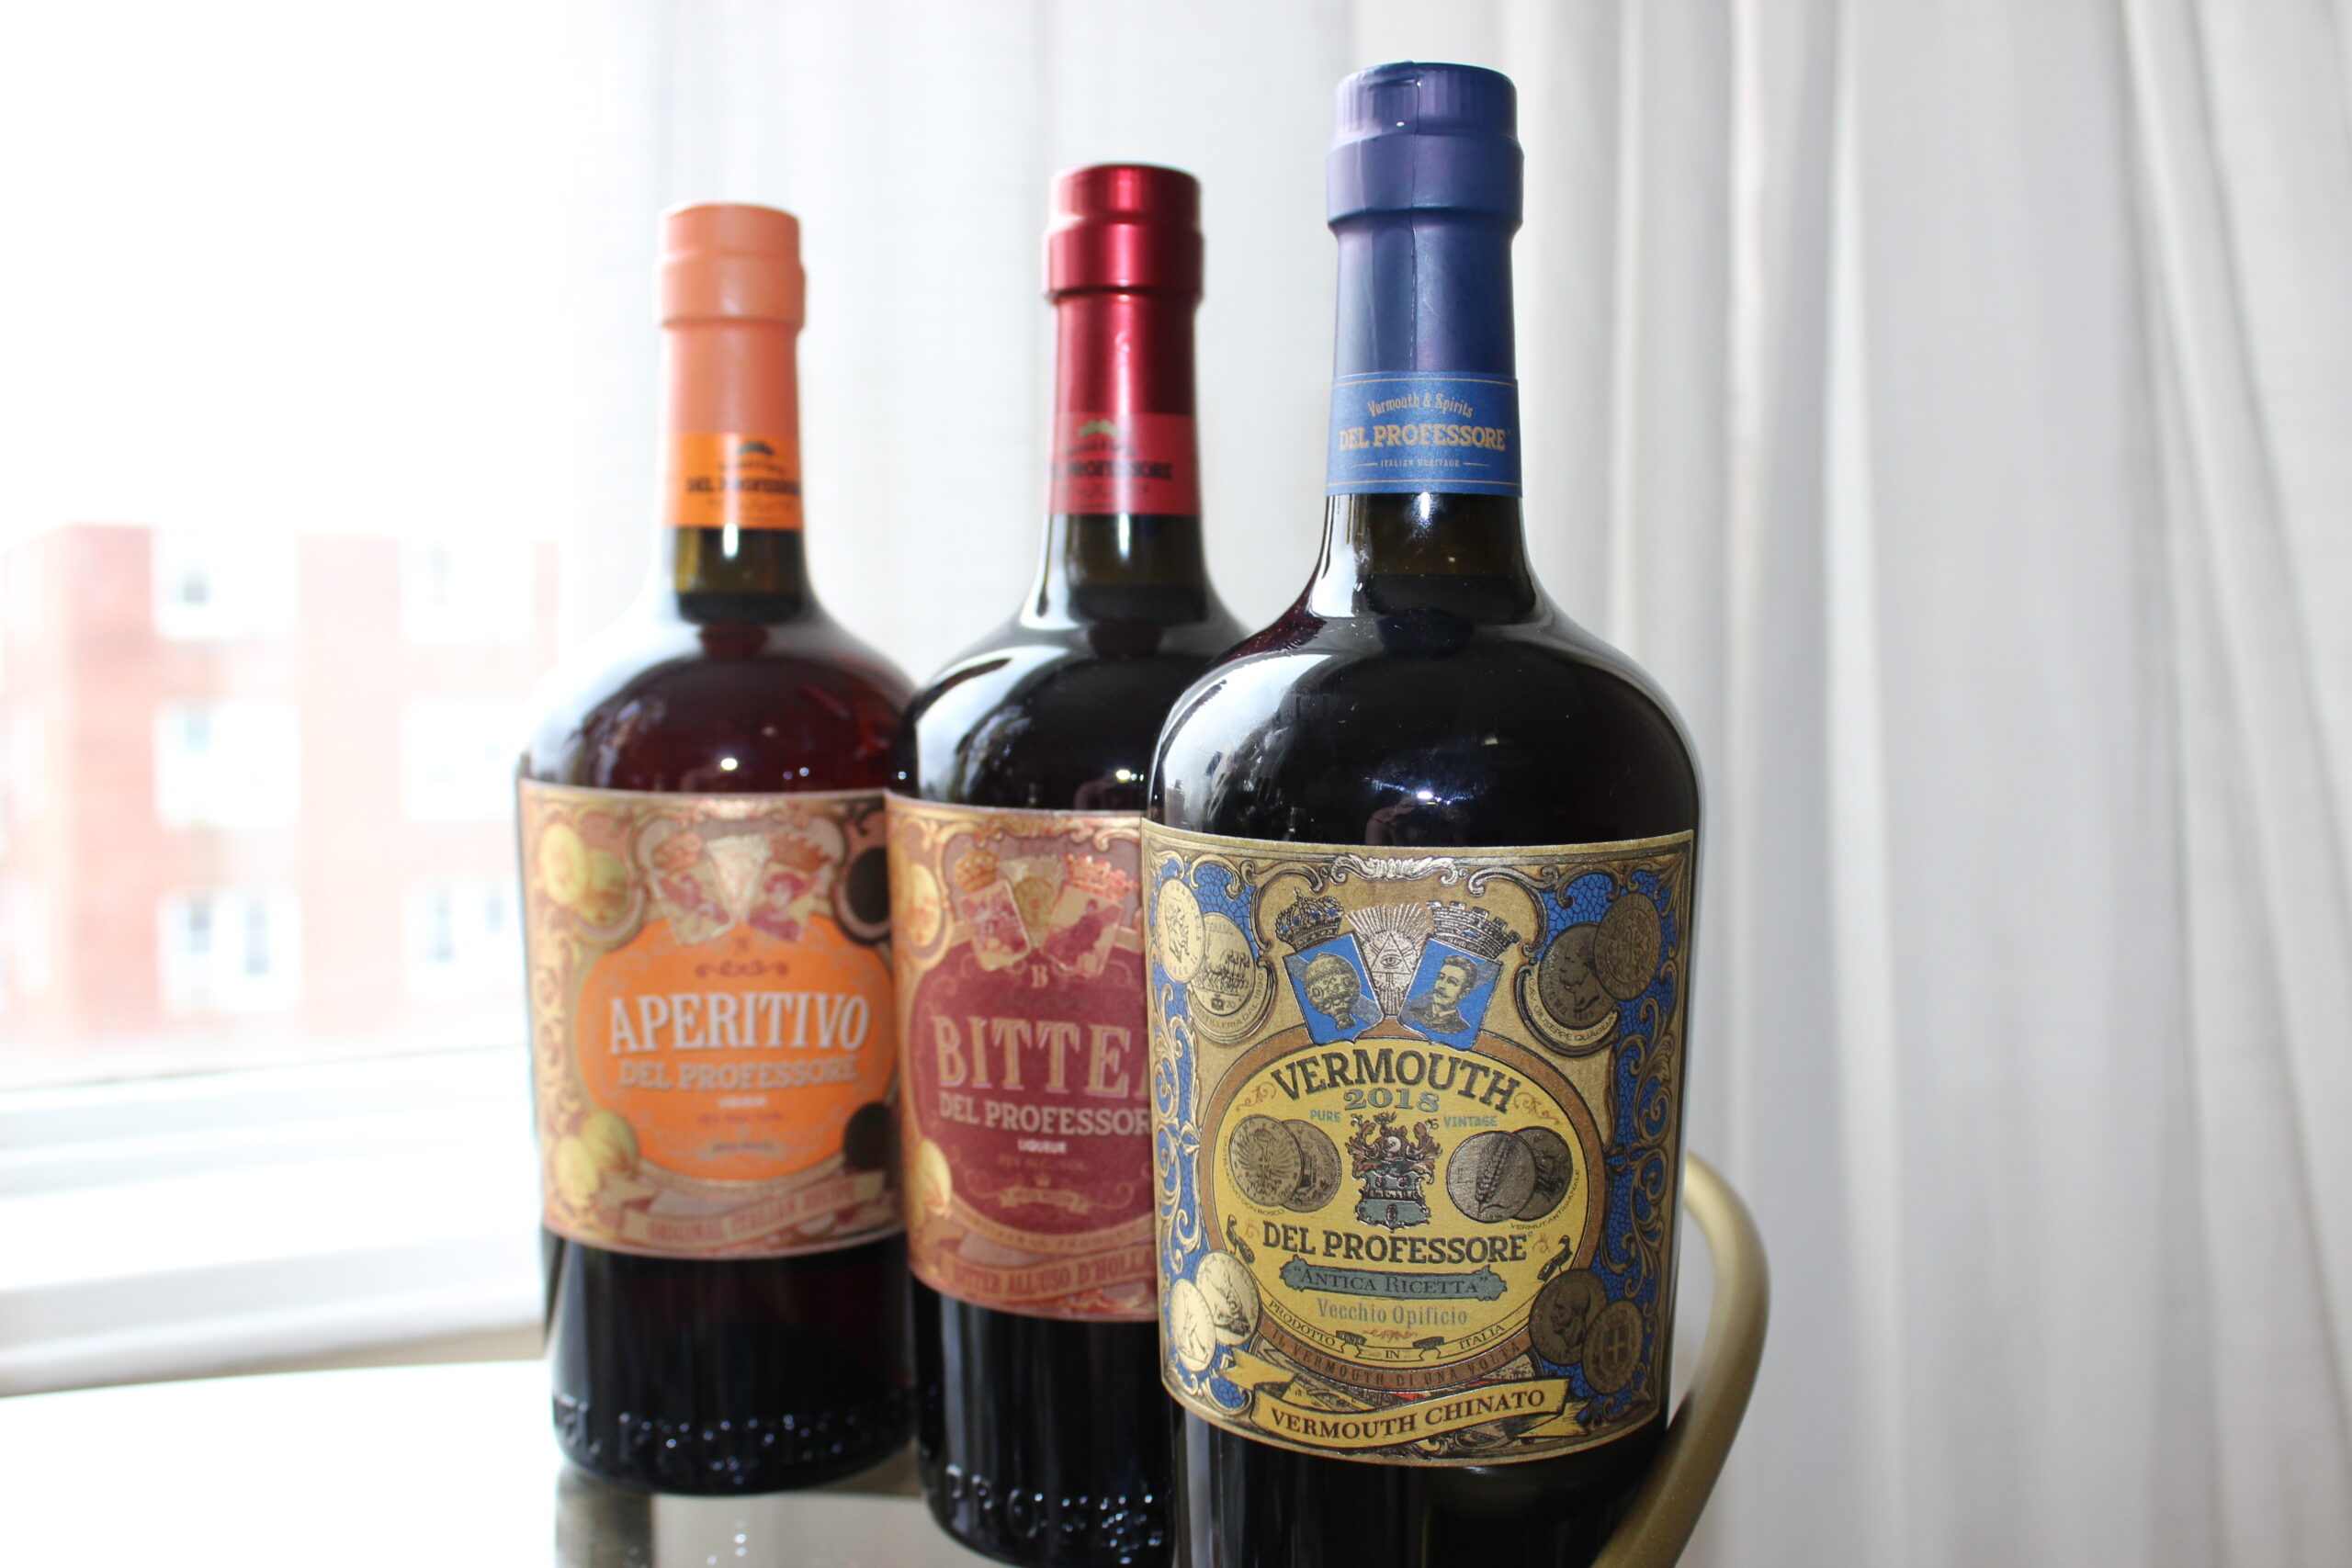 Del Professore Chinato, Aperitivo and Bitters Vermouth are now available in NY